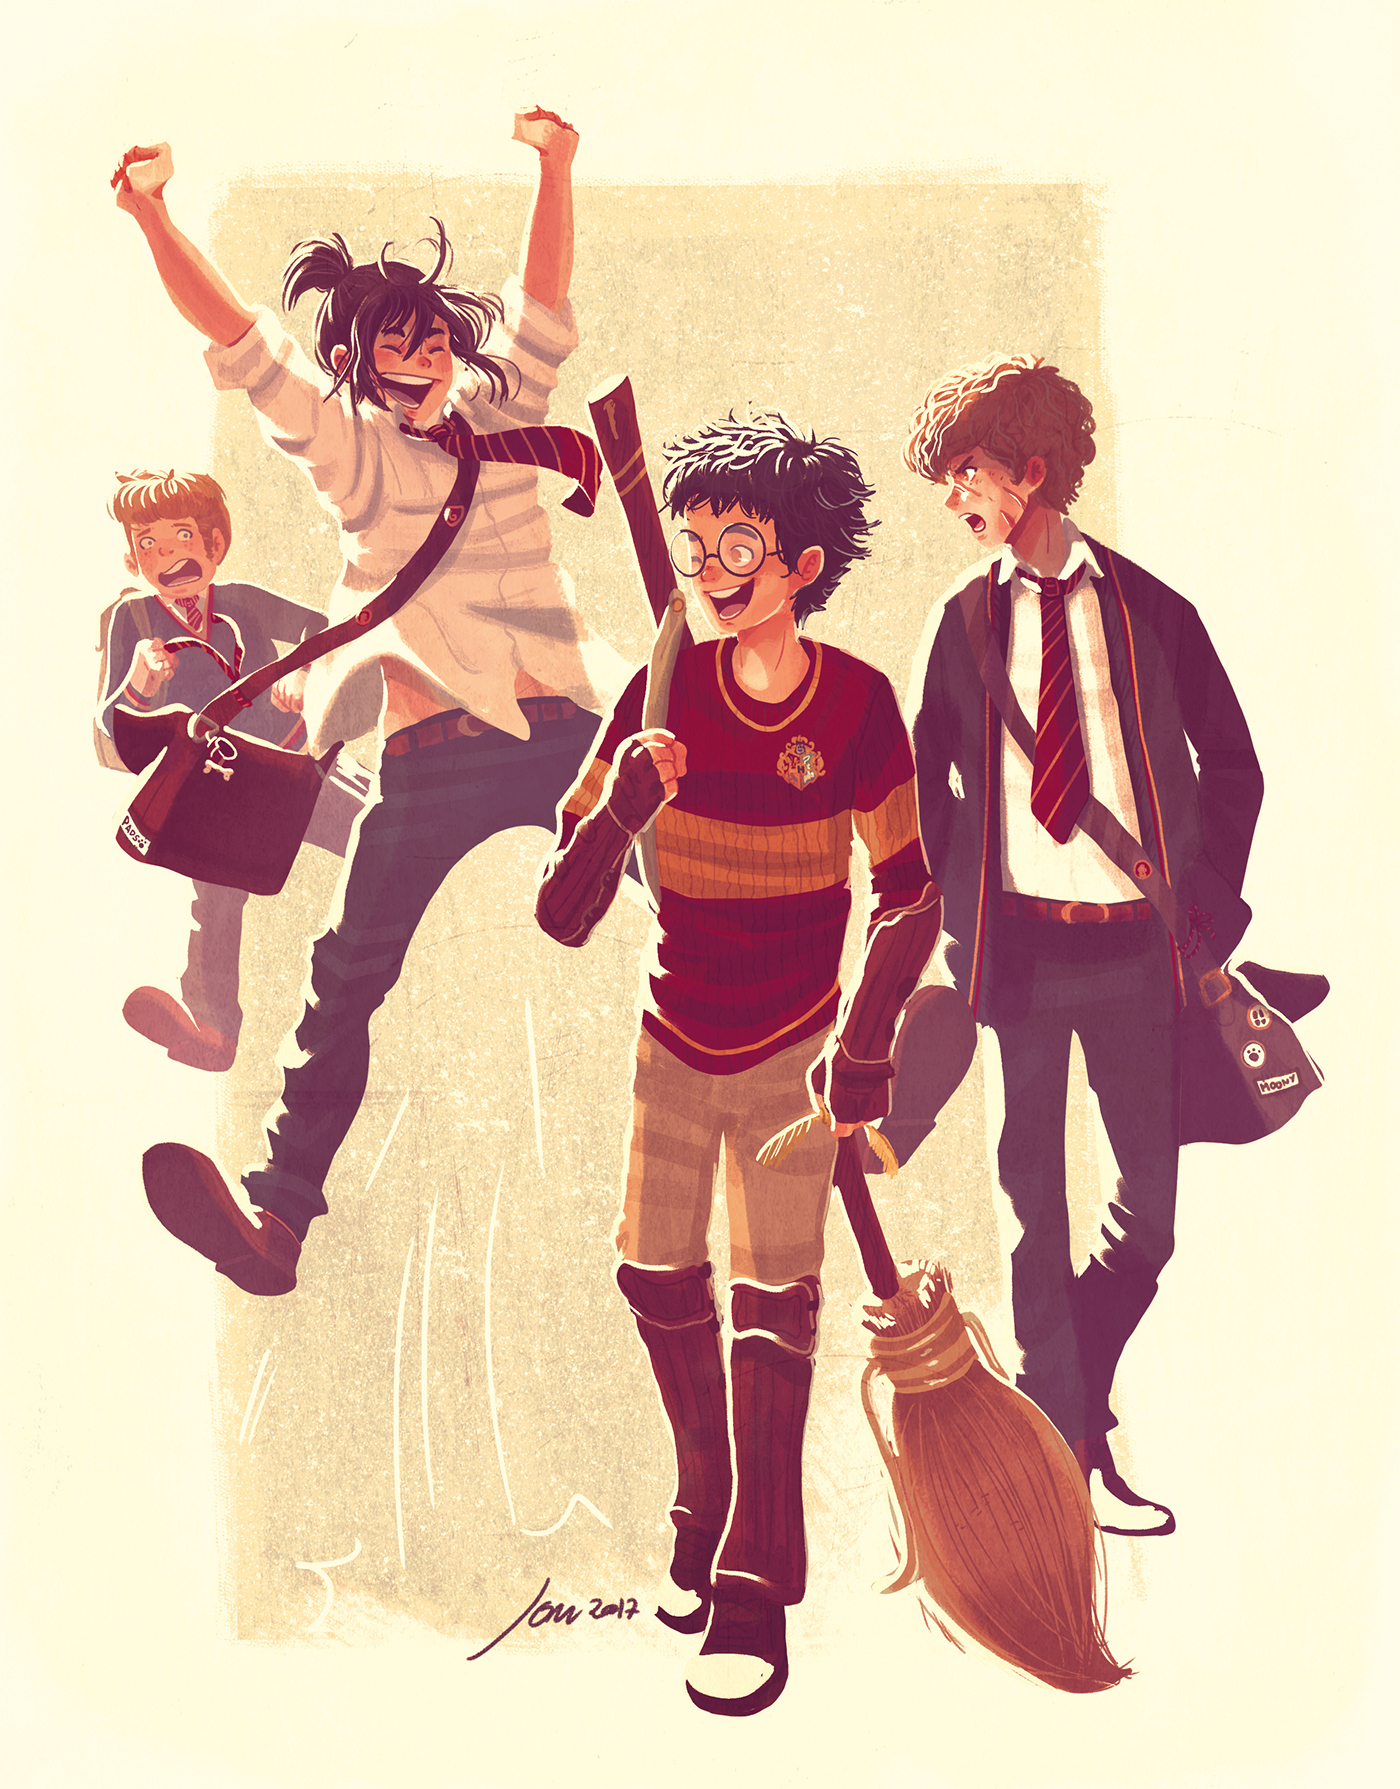 A Marauders Fanart From The Harry Potter Book Series. 